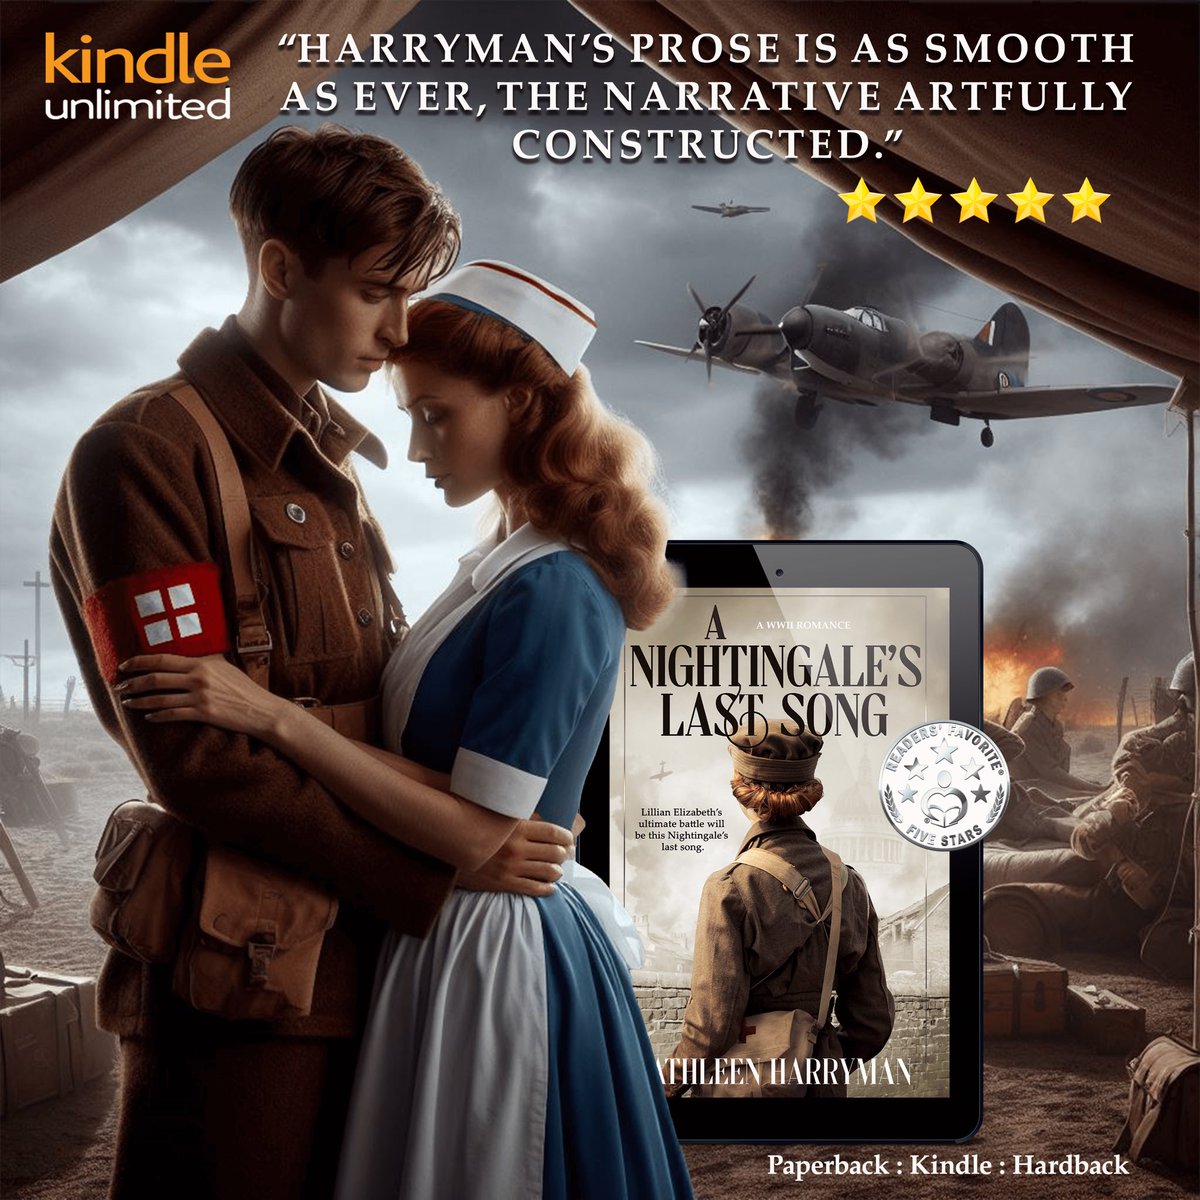 #NewRelease #BookReview 'The author captures the emotional turmoil of forbidden love and the resilience of the human spirit amidst the chaos of war.' #Kindle #KU #Paperback #Hardback mybook.to/Nightingales #HistoricalFiction #Romance #HistoricalRomance #Histfic #WWII #IARTG